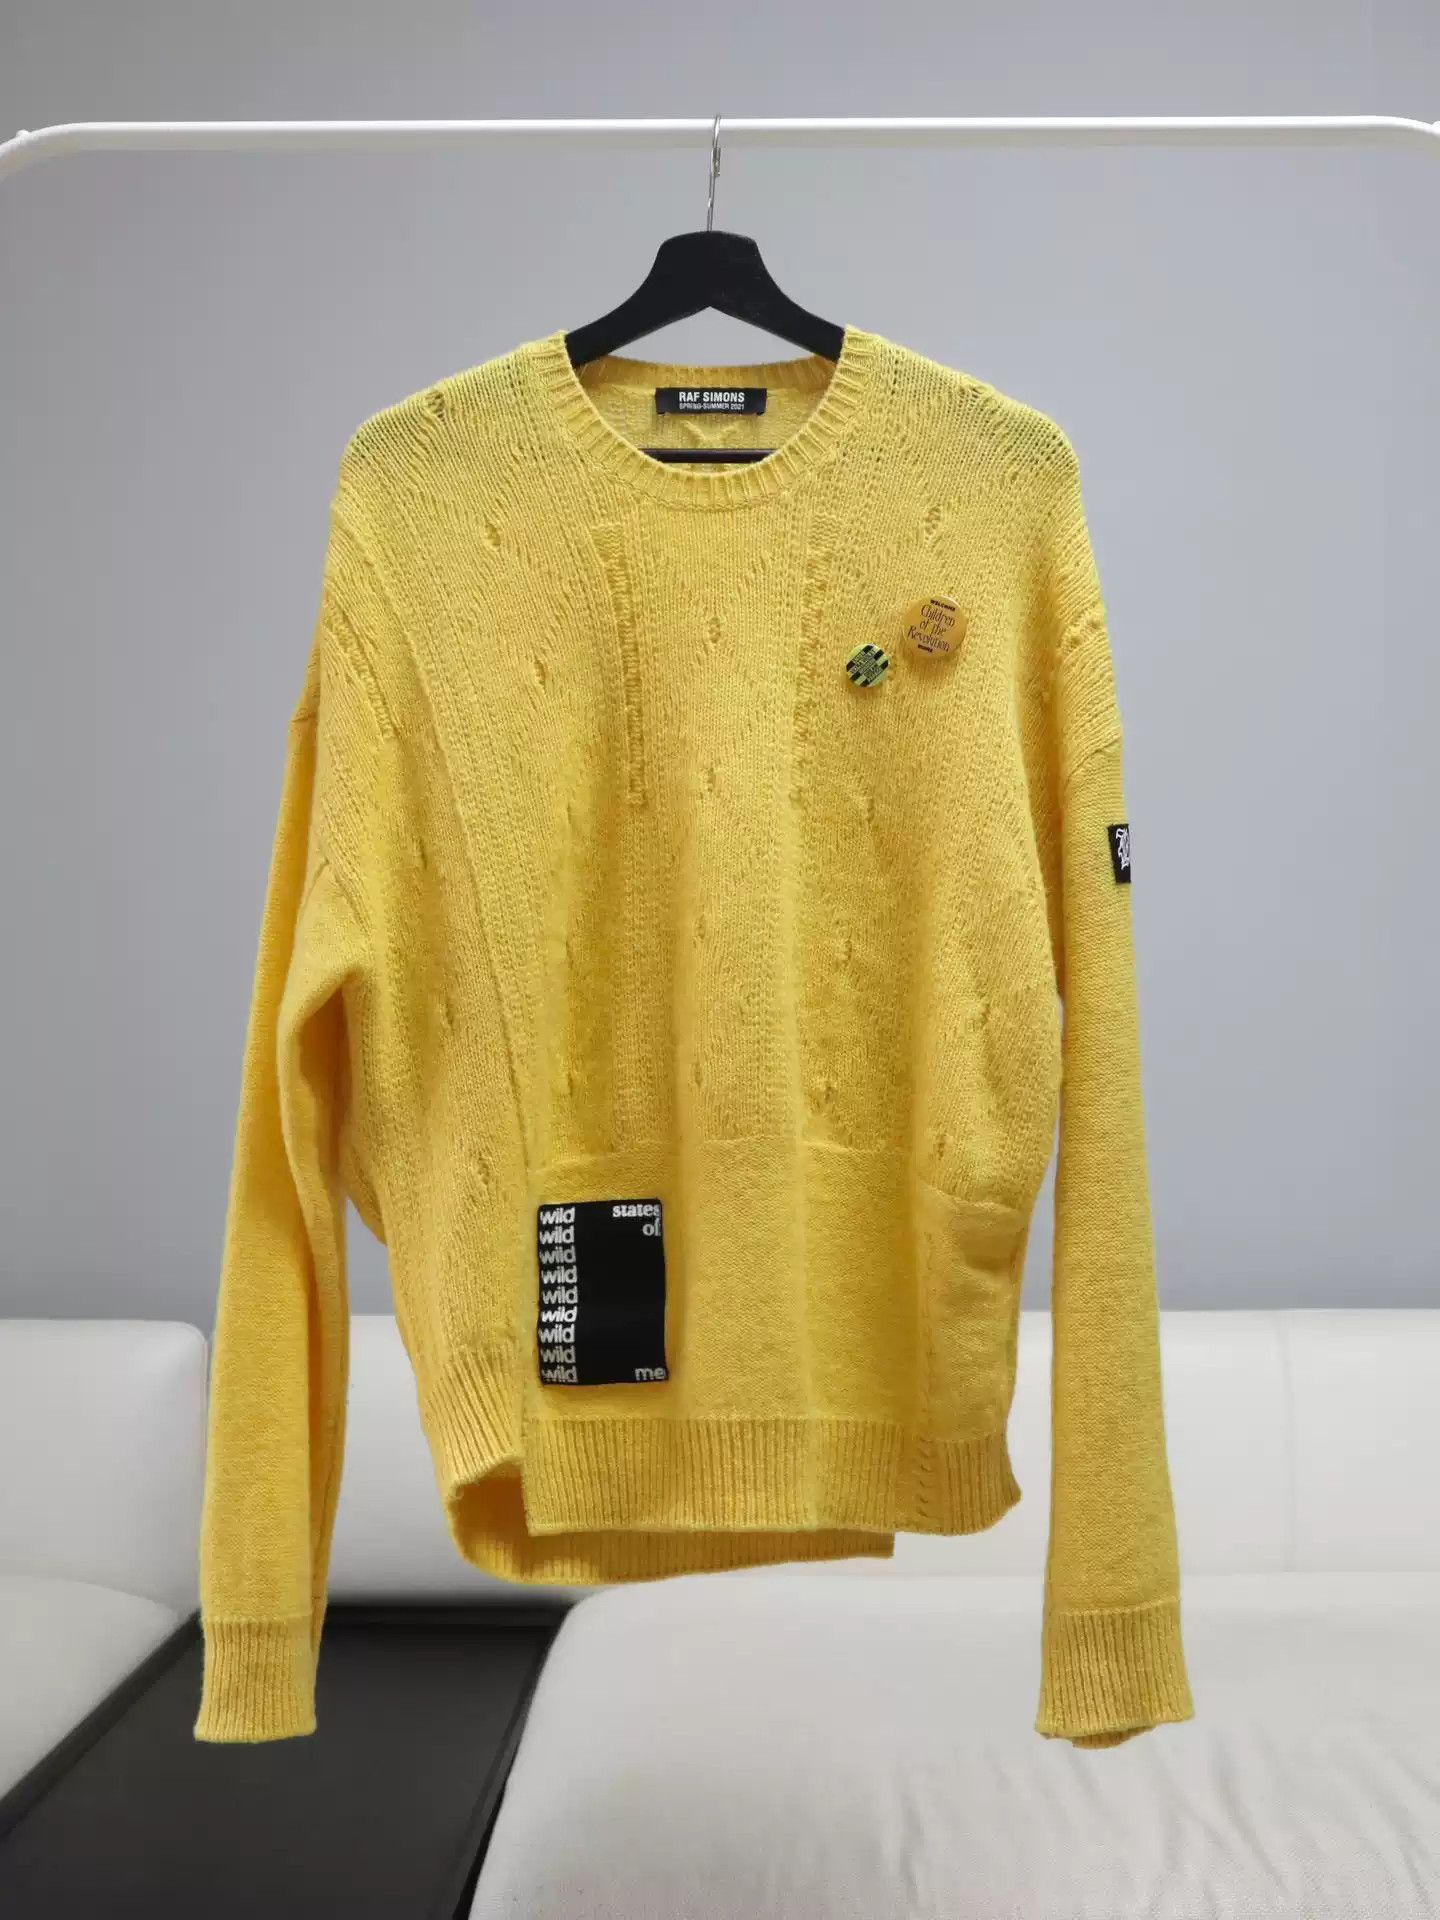 Raf Simons Raf Simons 21SS show yellow patch badge silhouette sweater |  Grailed